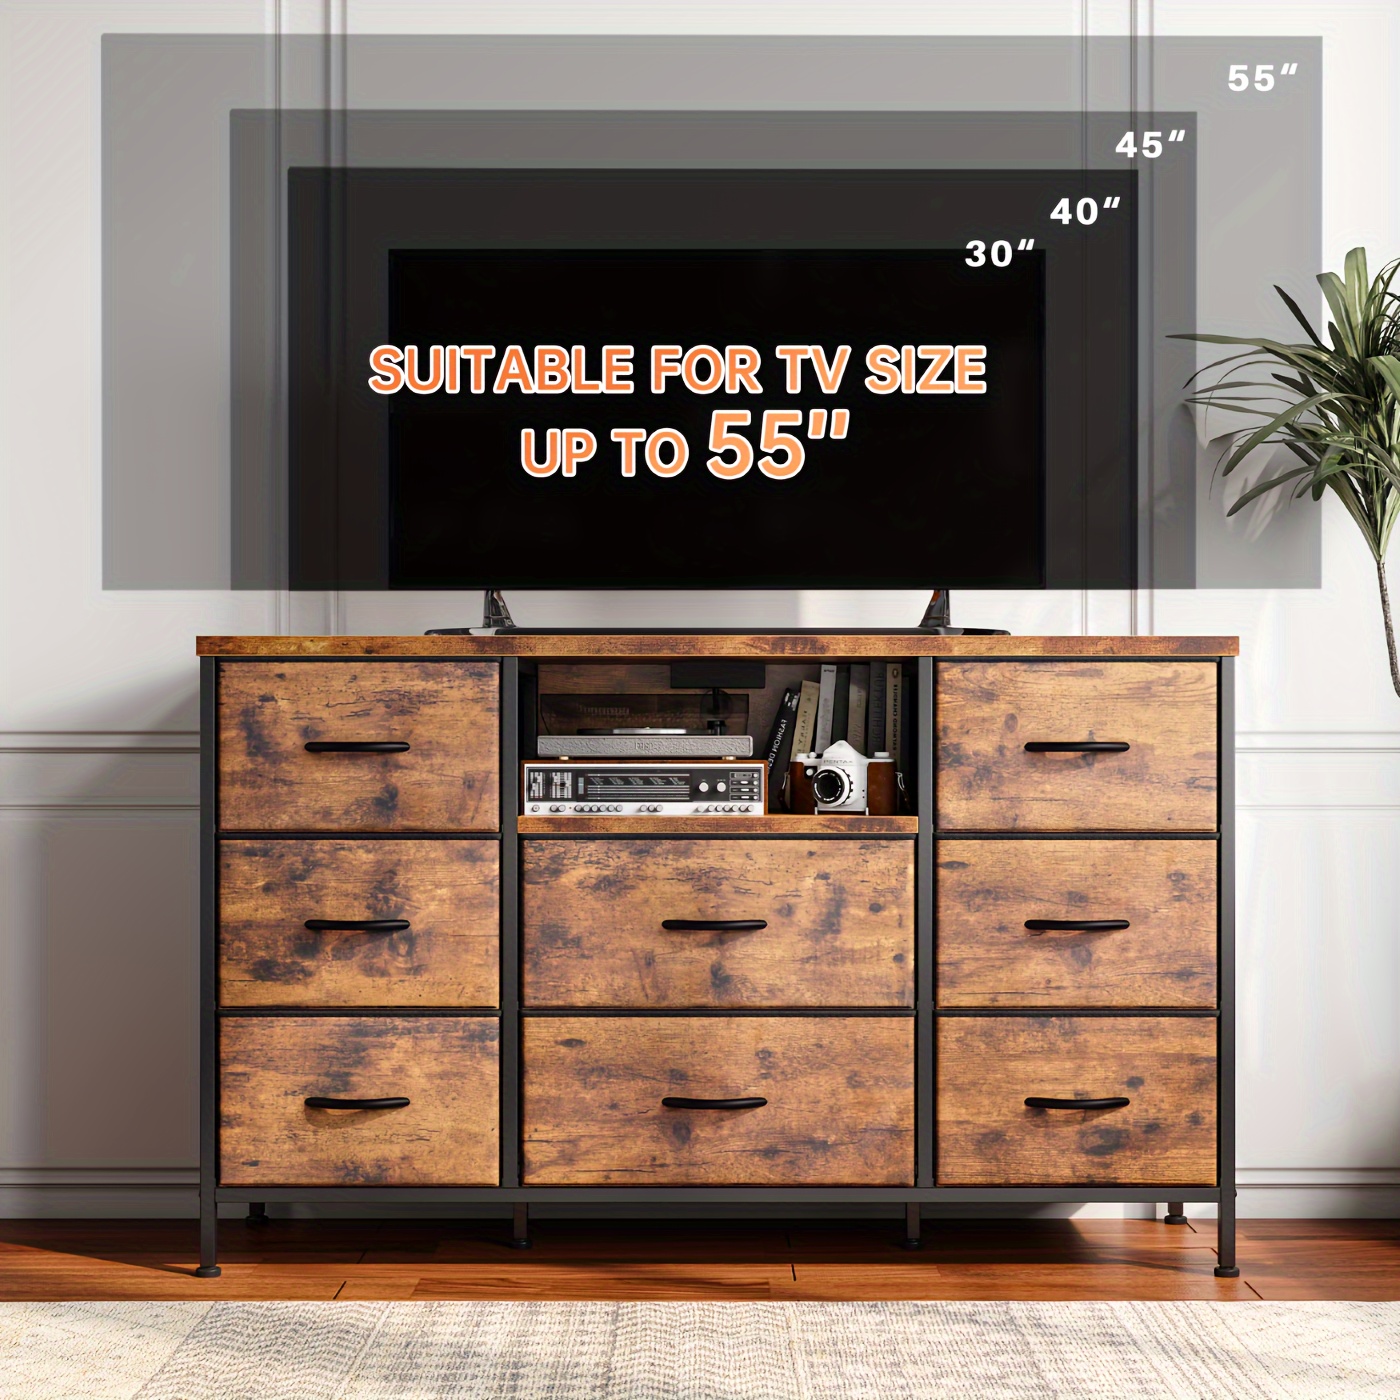 

Dresser Tv Stand With Power Outlet Entertainment Center With 8 Fabric Deep Drawers Media Console Table For 55" Tv Wide Storage Drawer Dresser For Bedroom, Living Room, Entryway, Rustic Brown